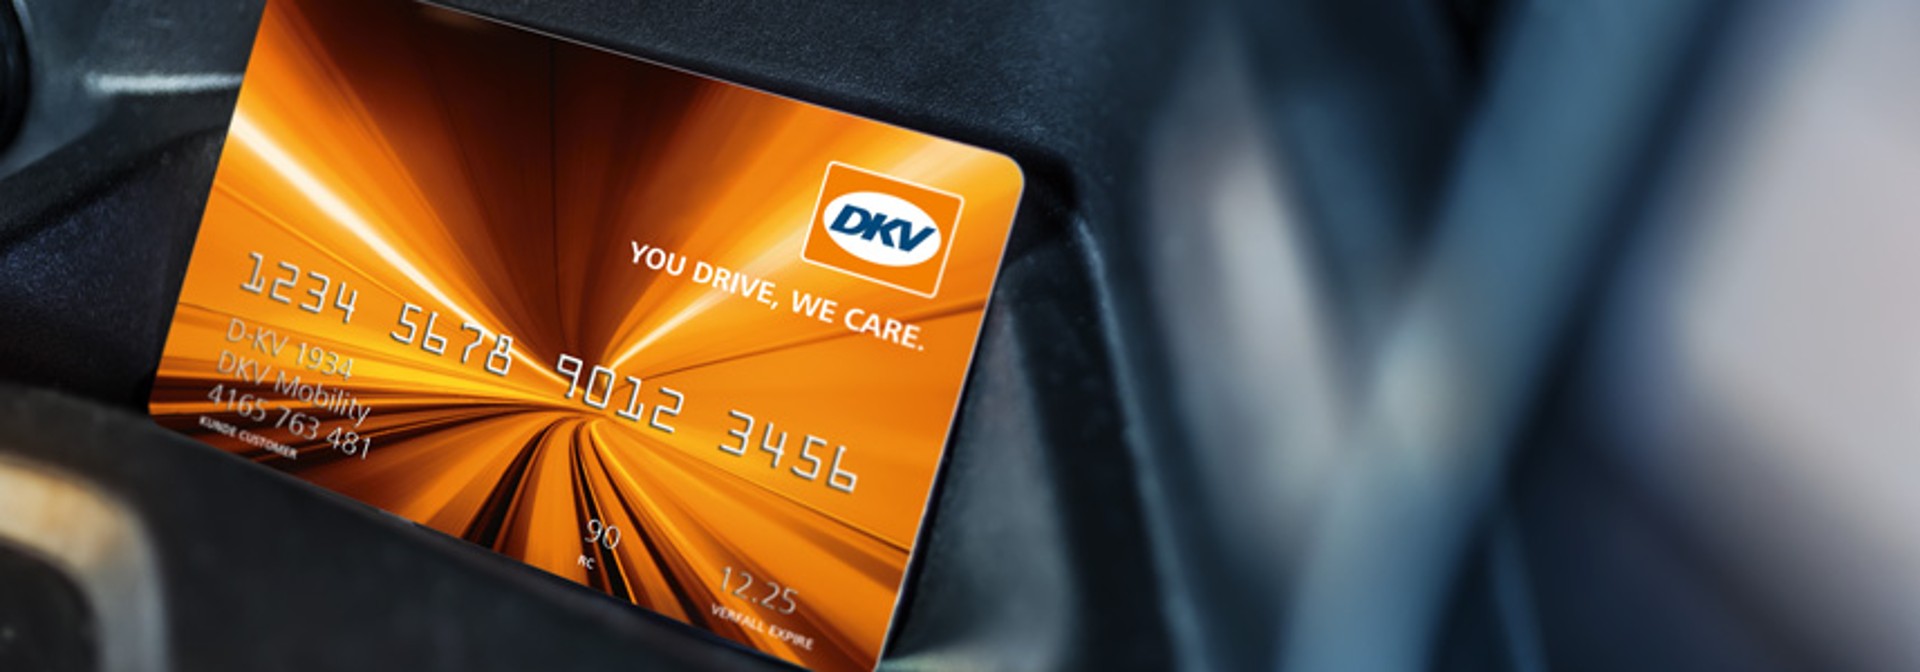 easy payment with dkv